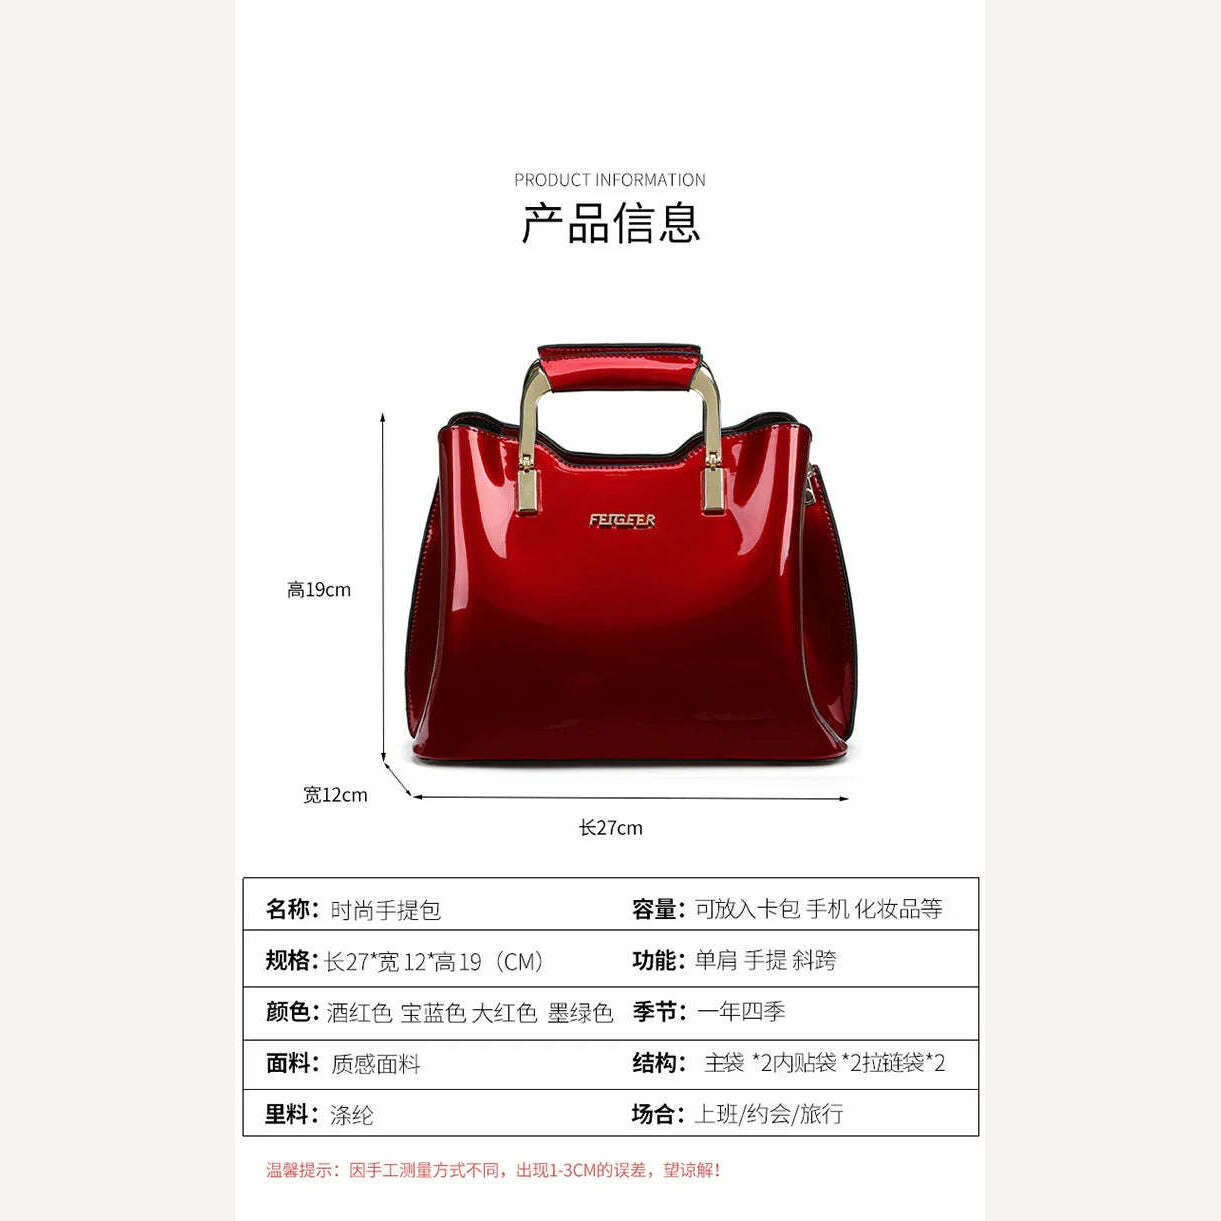 KIMLUD, High Quality Bright Patent Leather Women Bags Luxury Designer Purses And Handbags Female Green Shoulder Bag Ladies Hand Bag Tote, KIMLUD Women's Clothes